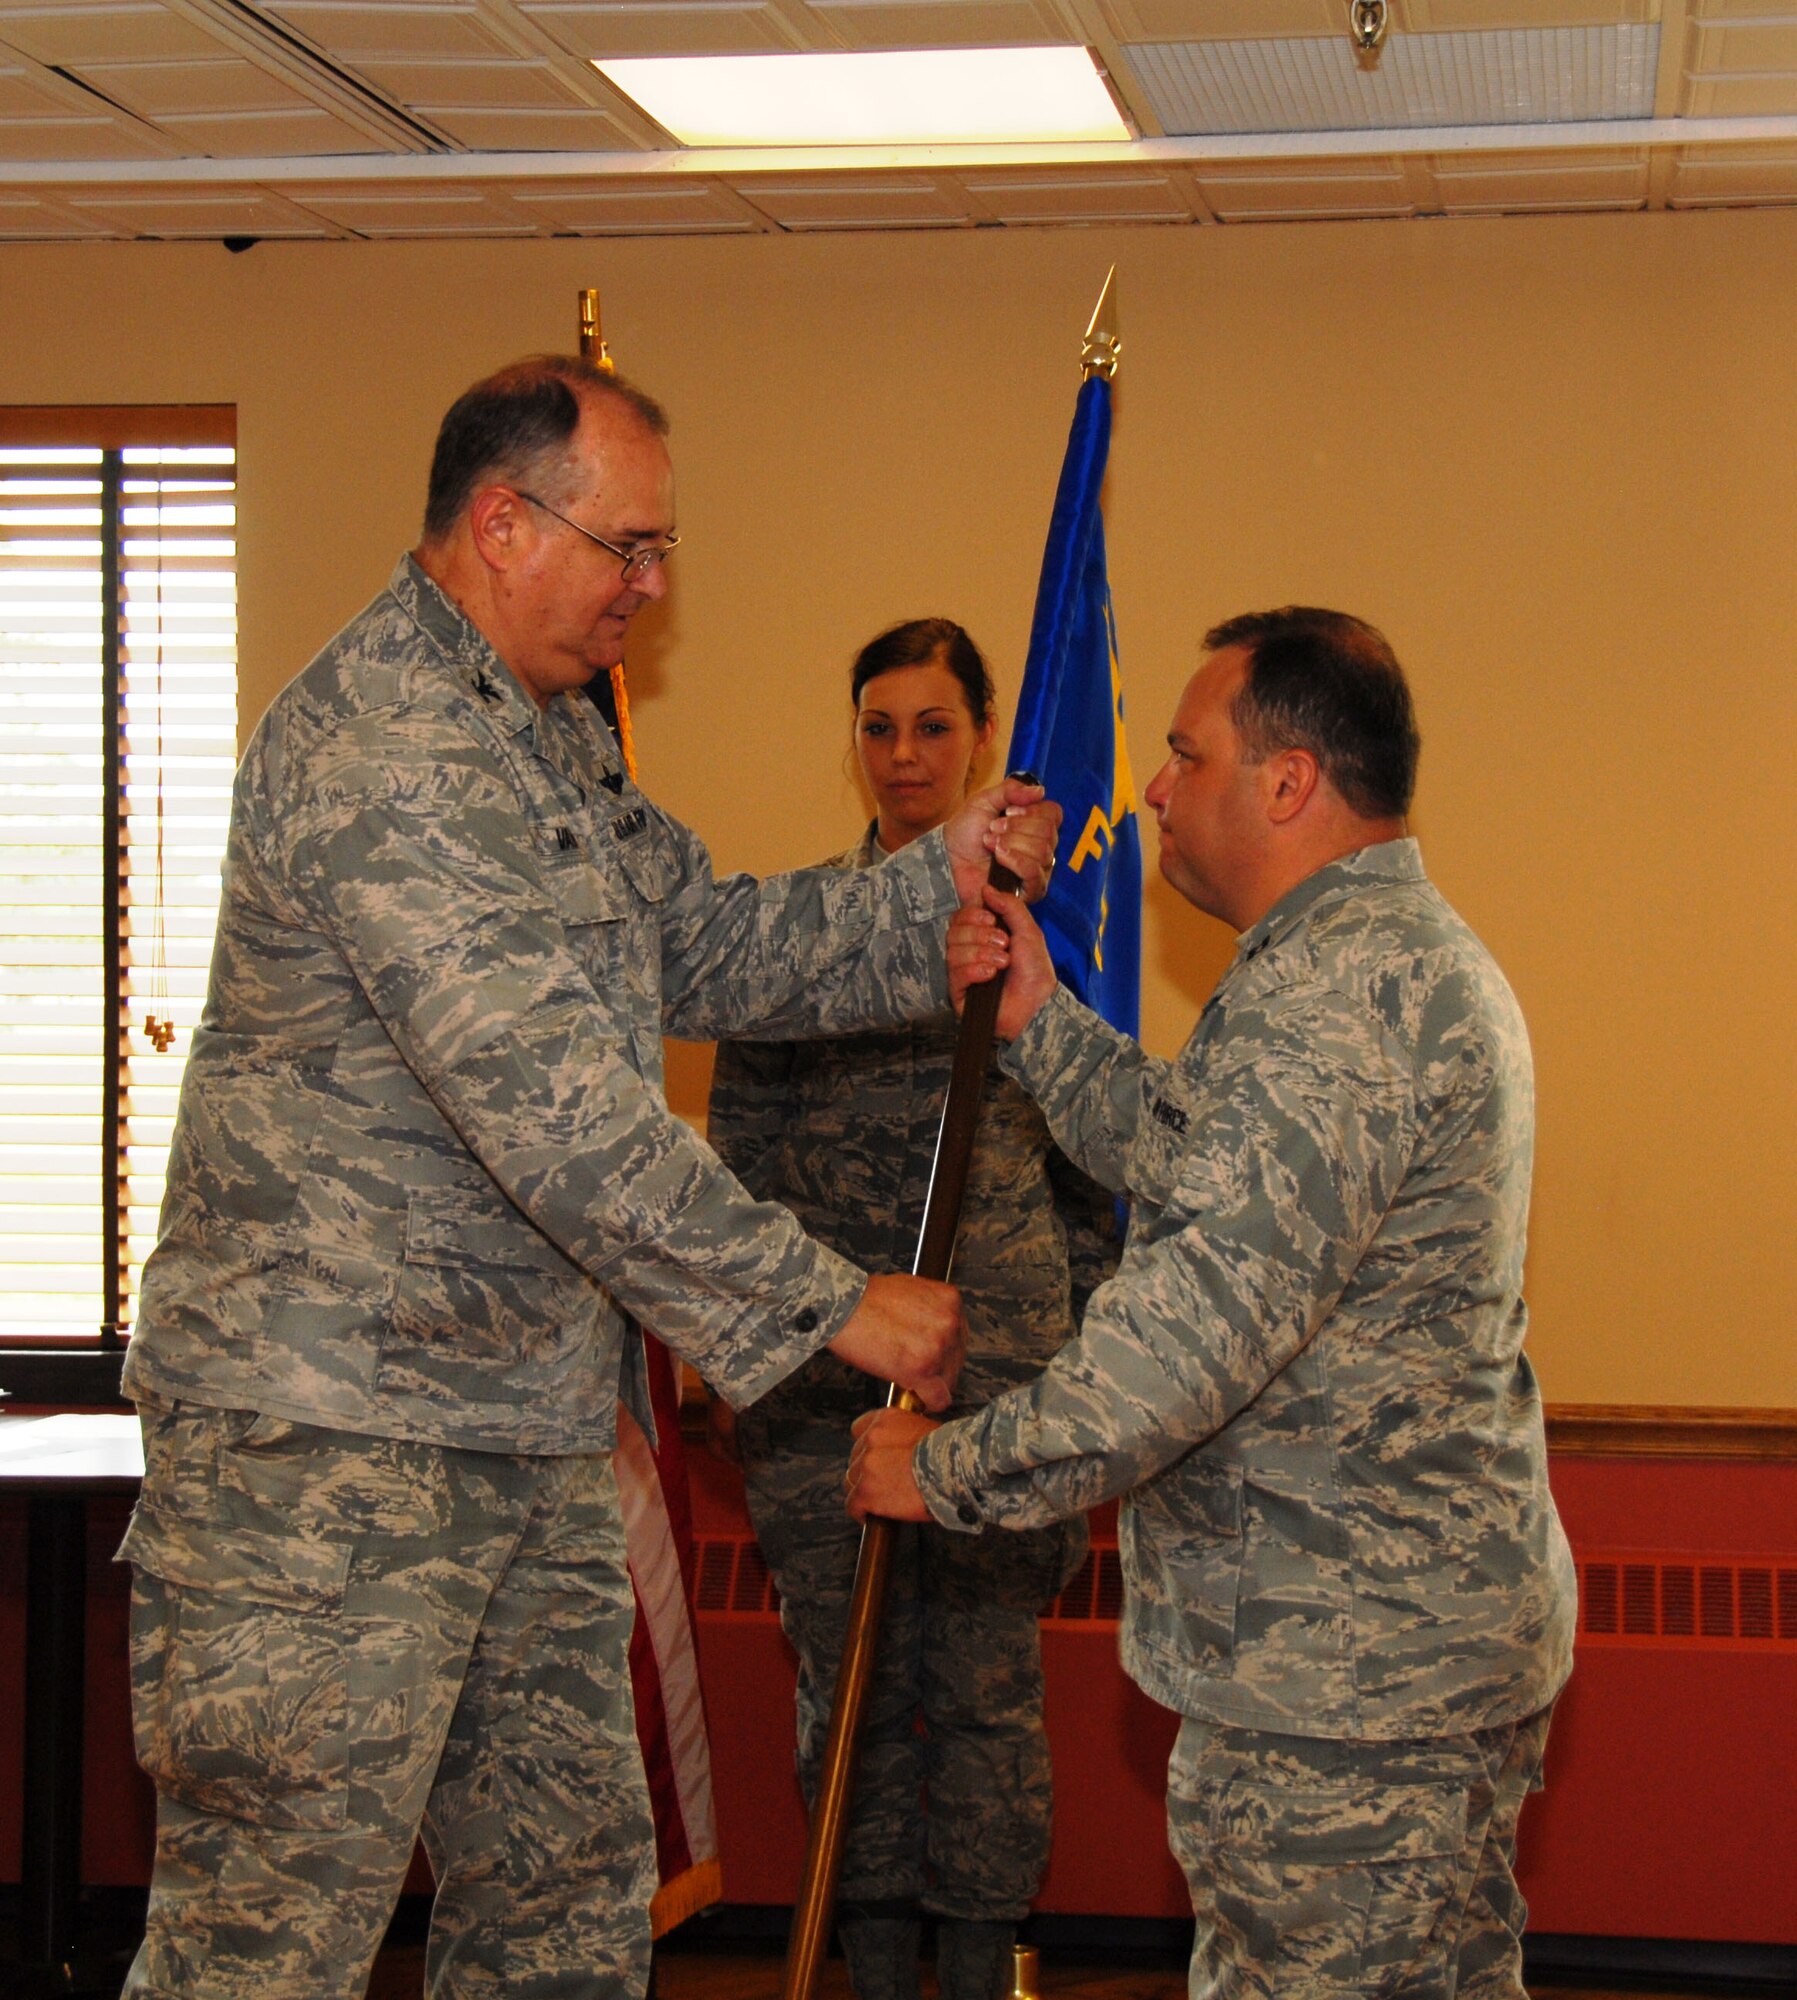 Captain Bryan Dalporto (on right) assumed command of the 107th Airlift Wing's Force Support Squadron in a ceremony recently held here. The captain previously held the position as the 107 AW Services Squadron commander and replaces outgoing Commander Lt. Col. Linda Blaszak. The captain is now responsible for more than 100 Airmen. Passing the FSS Guidon is the 107th Mission Support Commander Col. Timothy Vaughan. (U.S. Air Force photo/Tech. Sgt. Justin Huett)